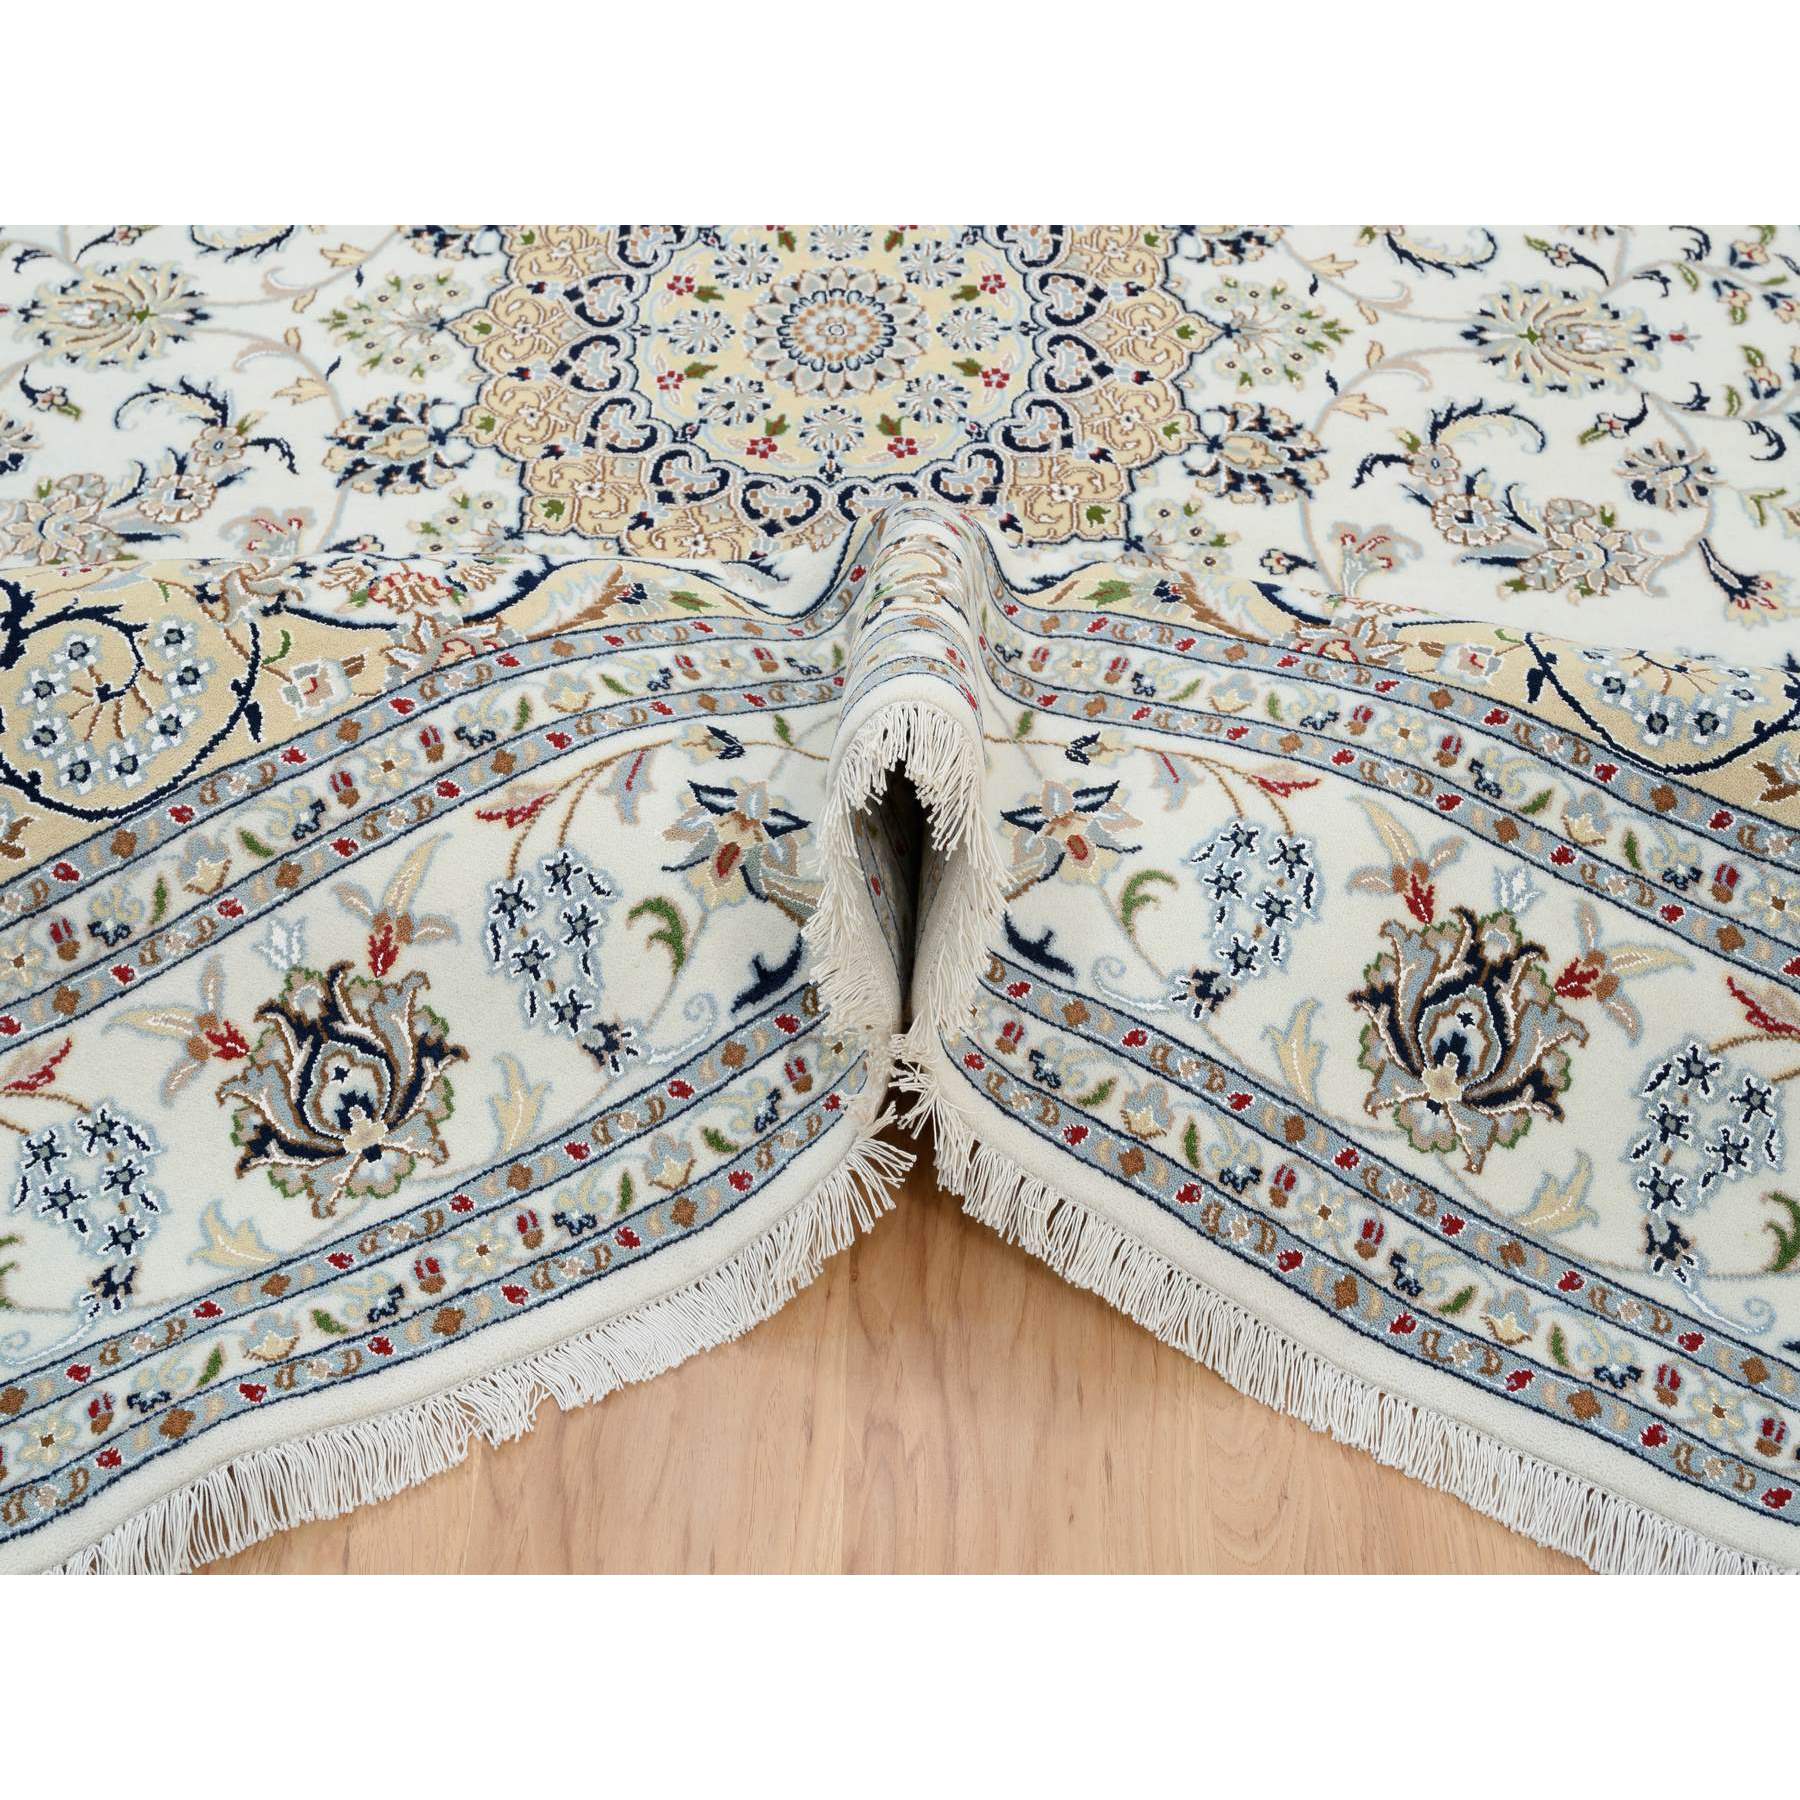 traditional Silk Hand-Knotted Area Rug 8'1